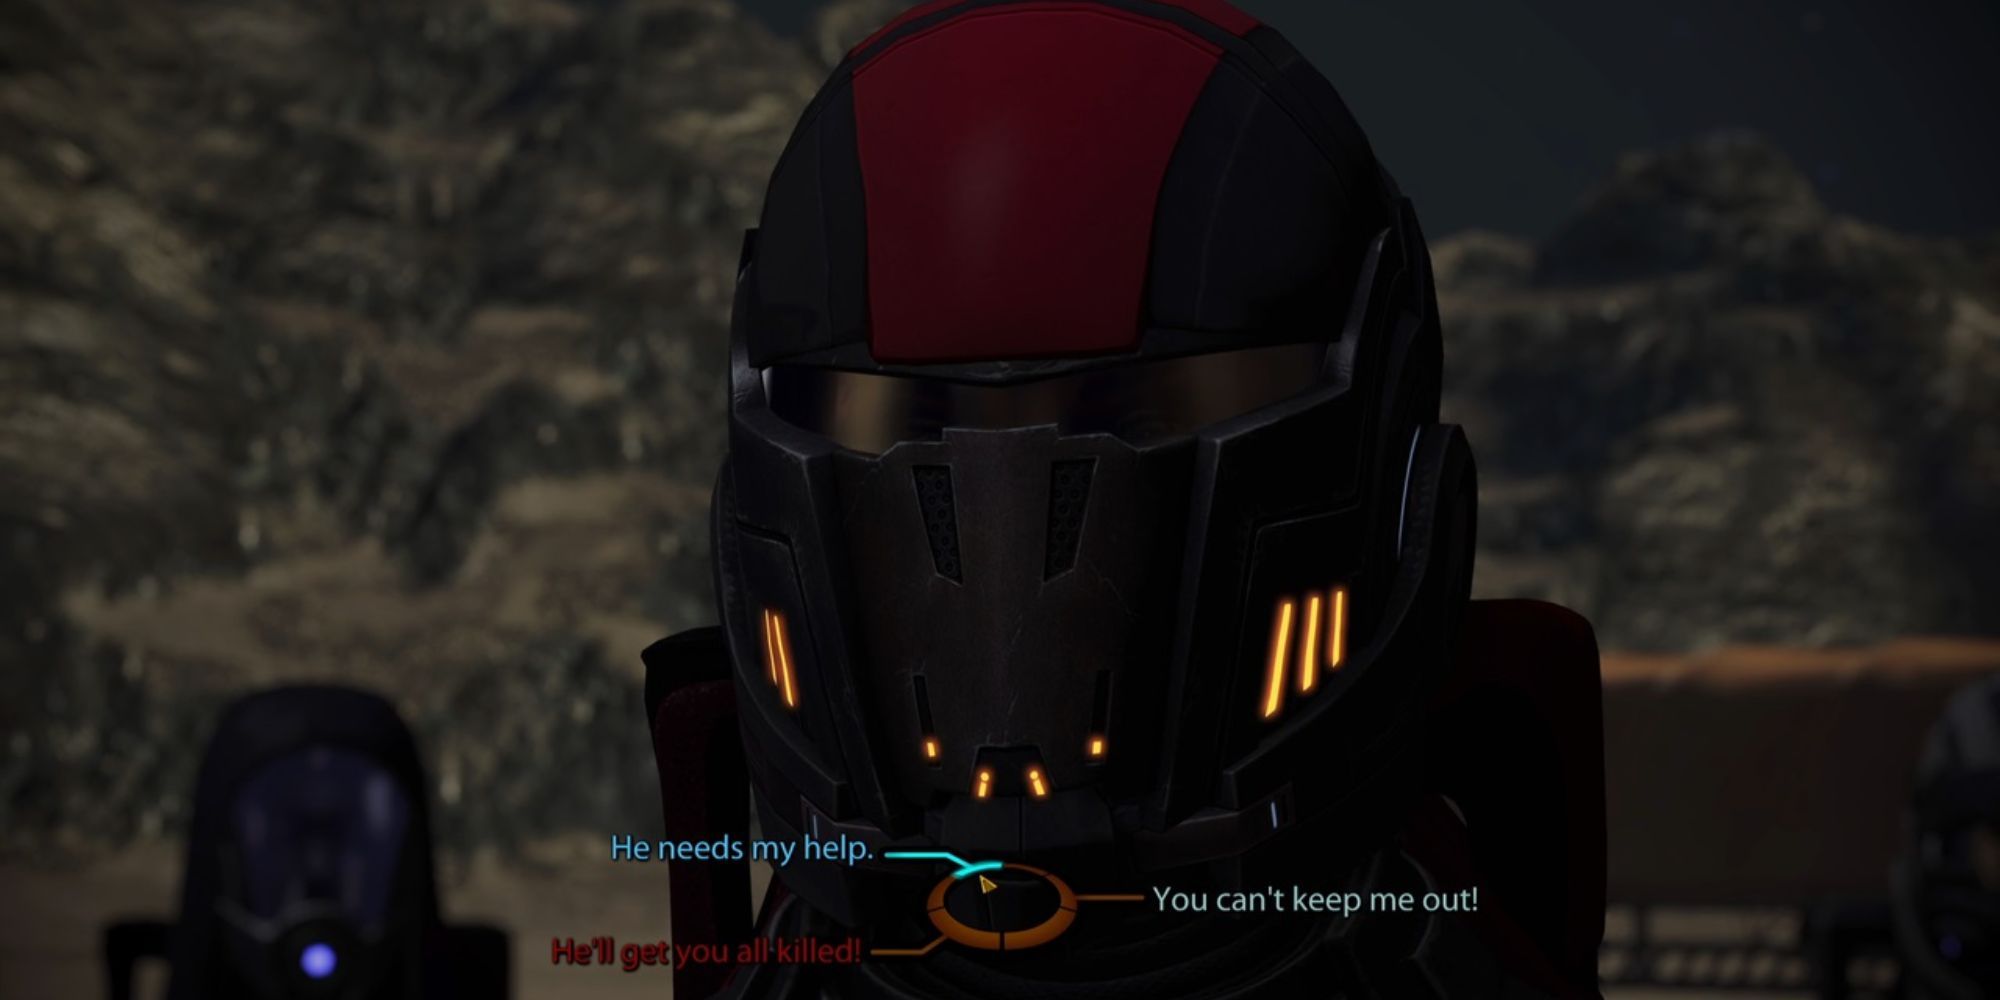 Bioware RPG Mass Effect Player's Shepard confronts Major Kyle's followers at their hideout